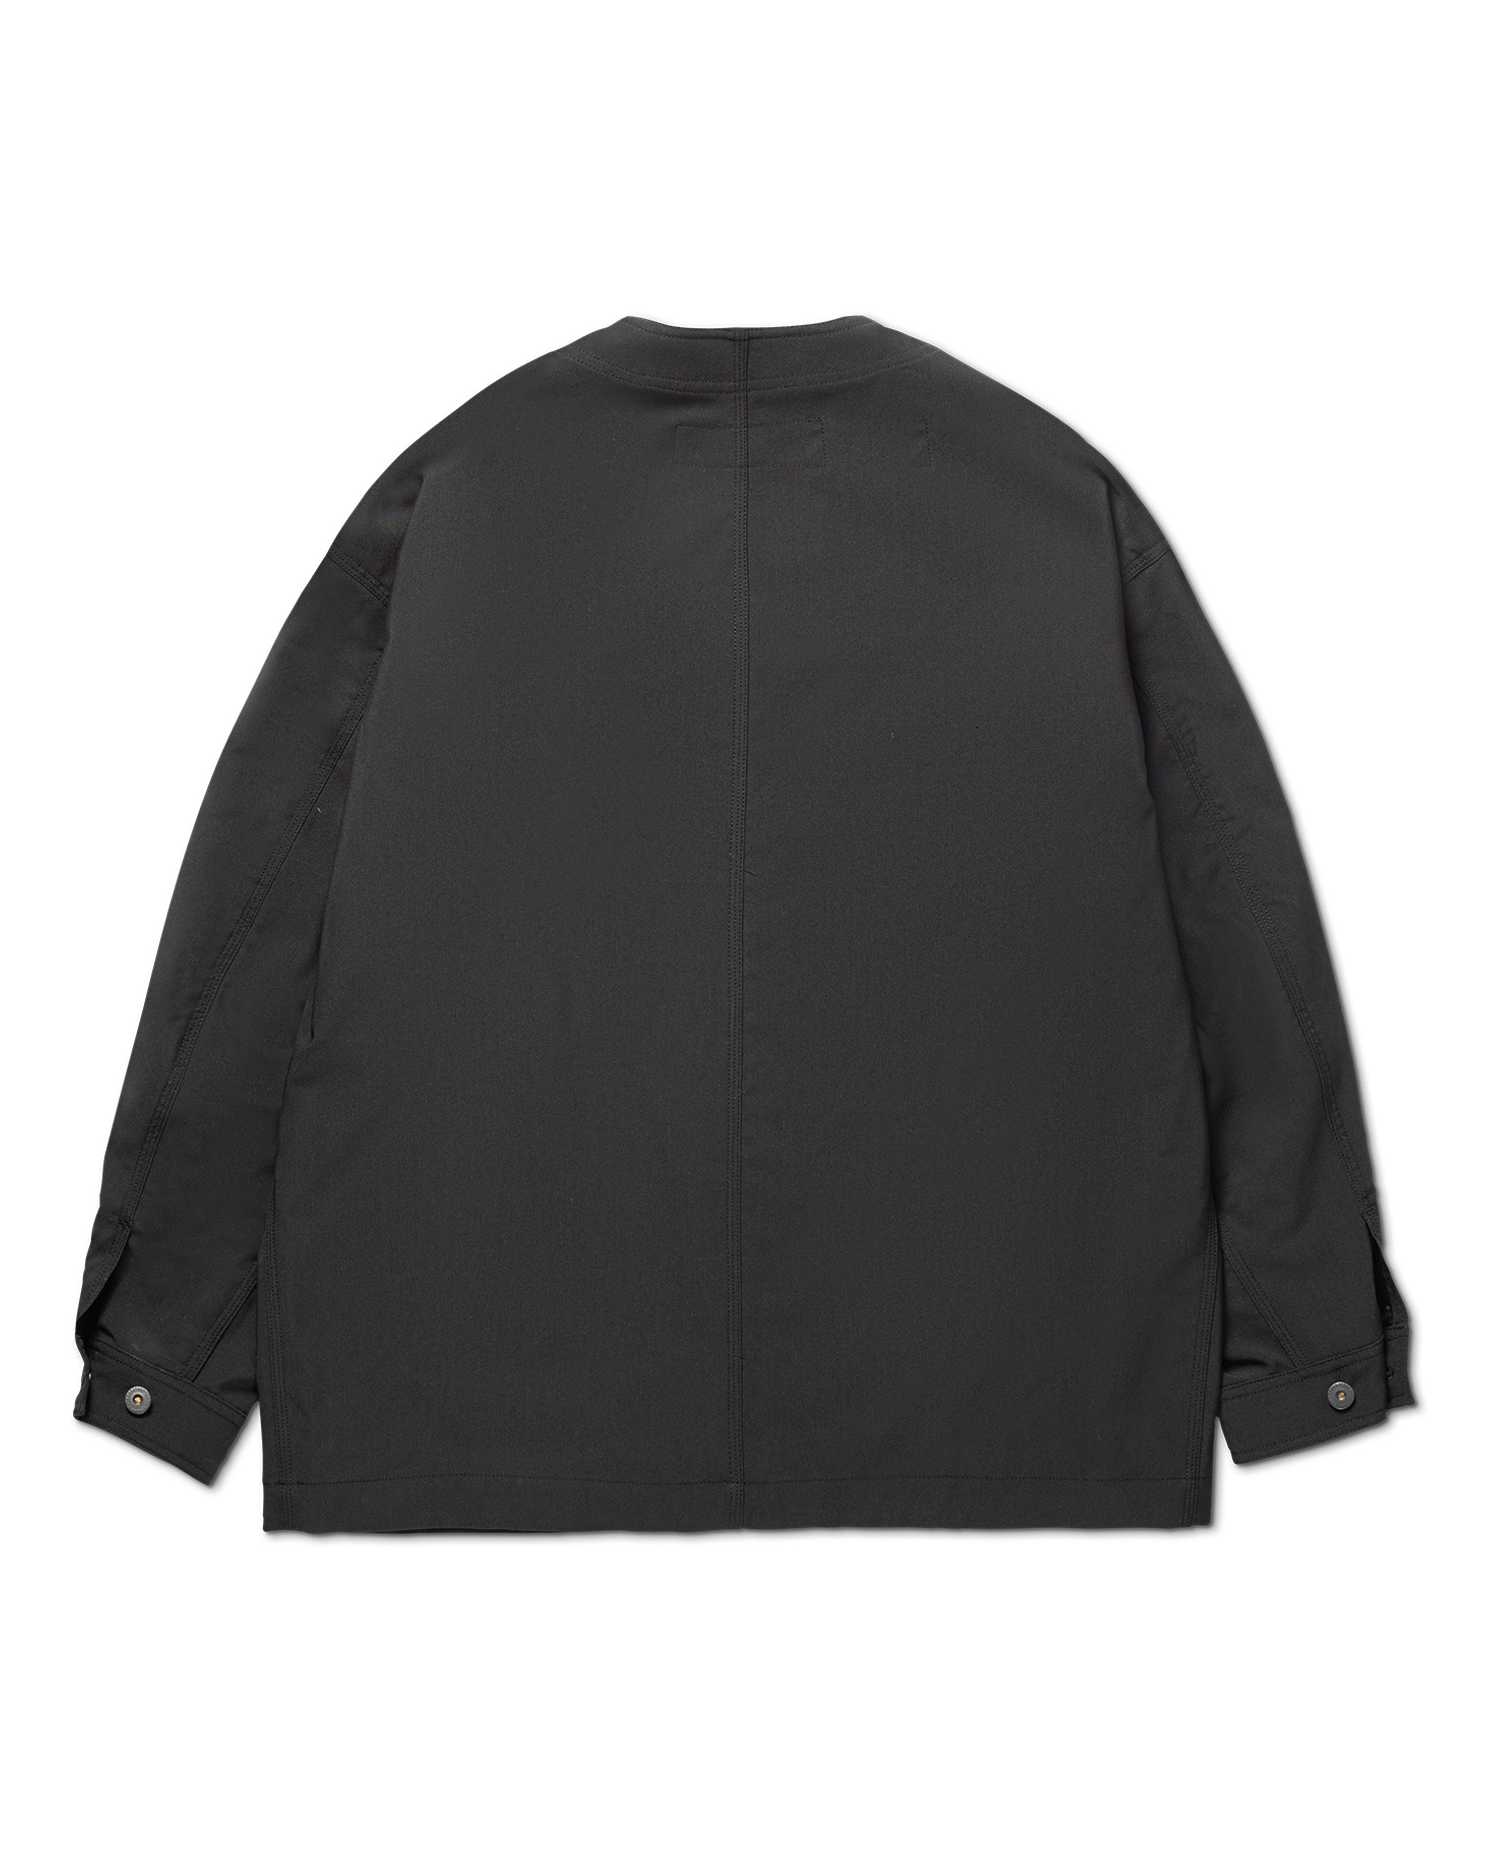 Comme des Garcons HOMME HK-J003 Jacketよろしくお願いいたします